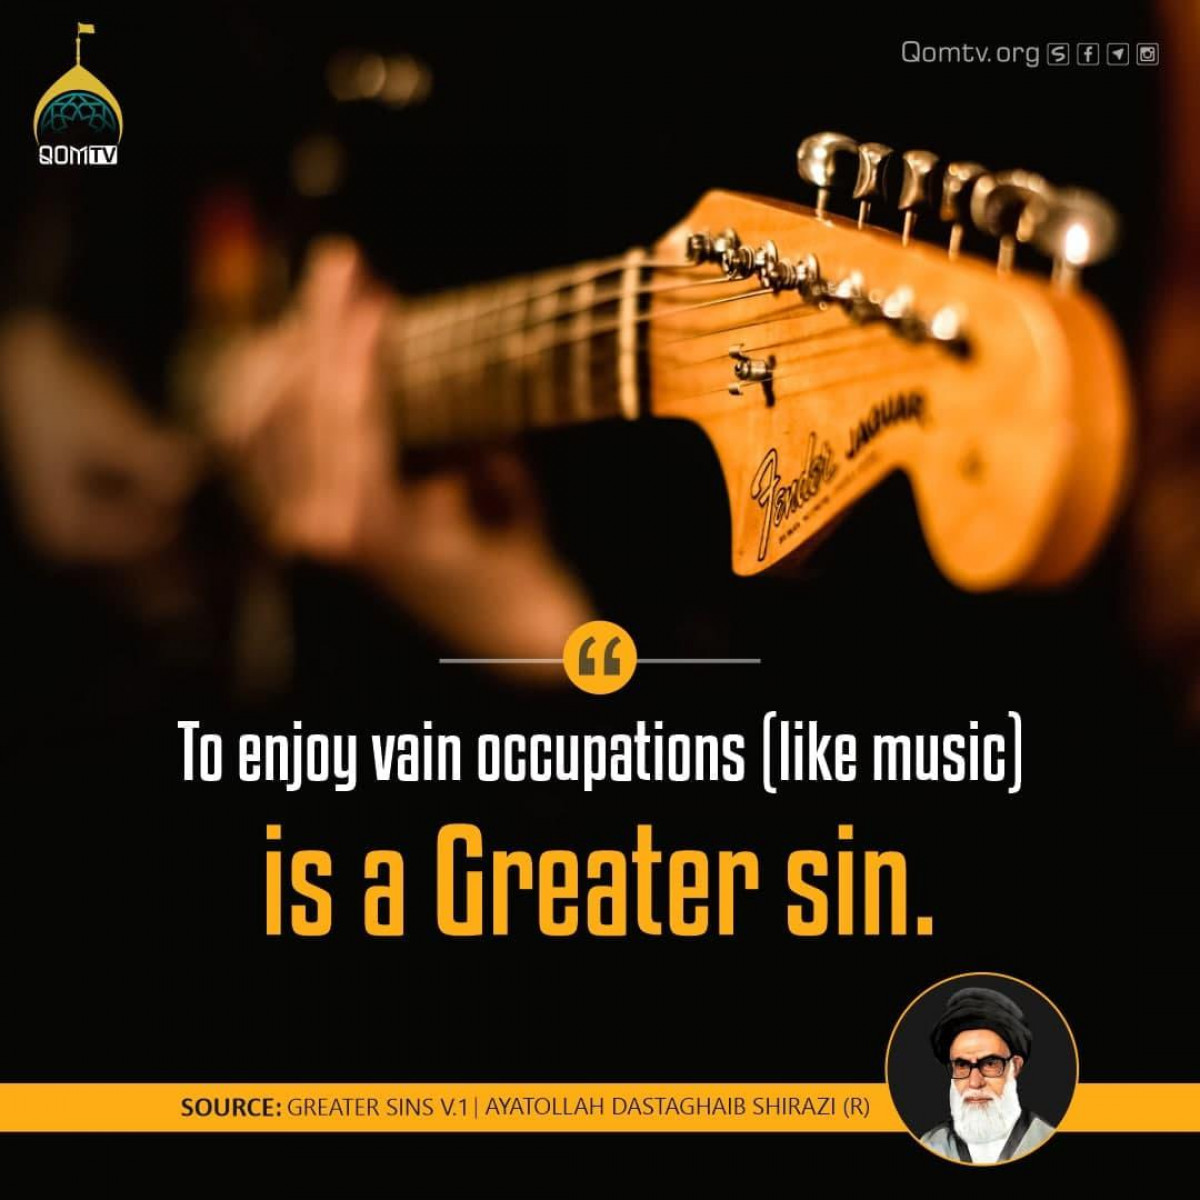 "To enjoy vain occupations (like music) is a Greater sin."